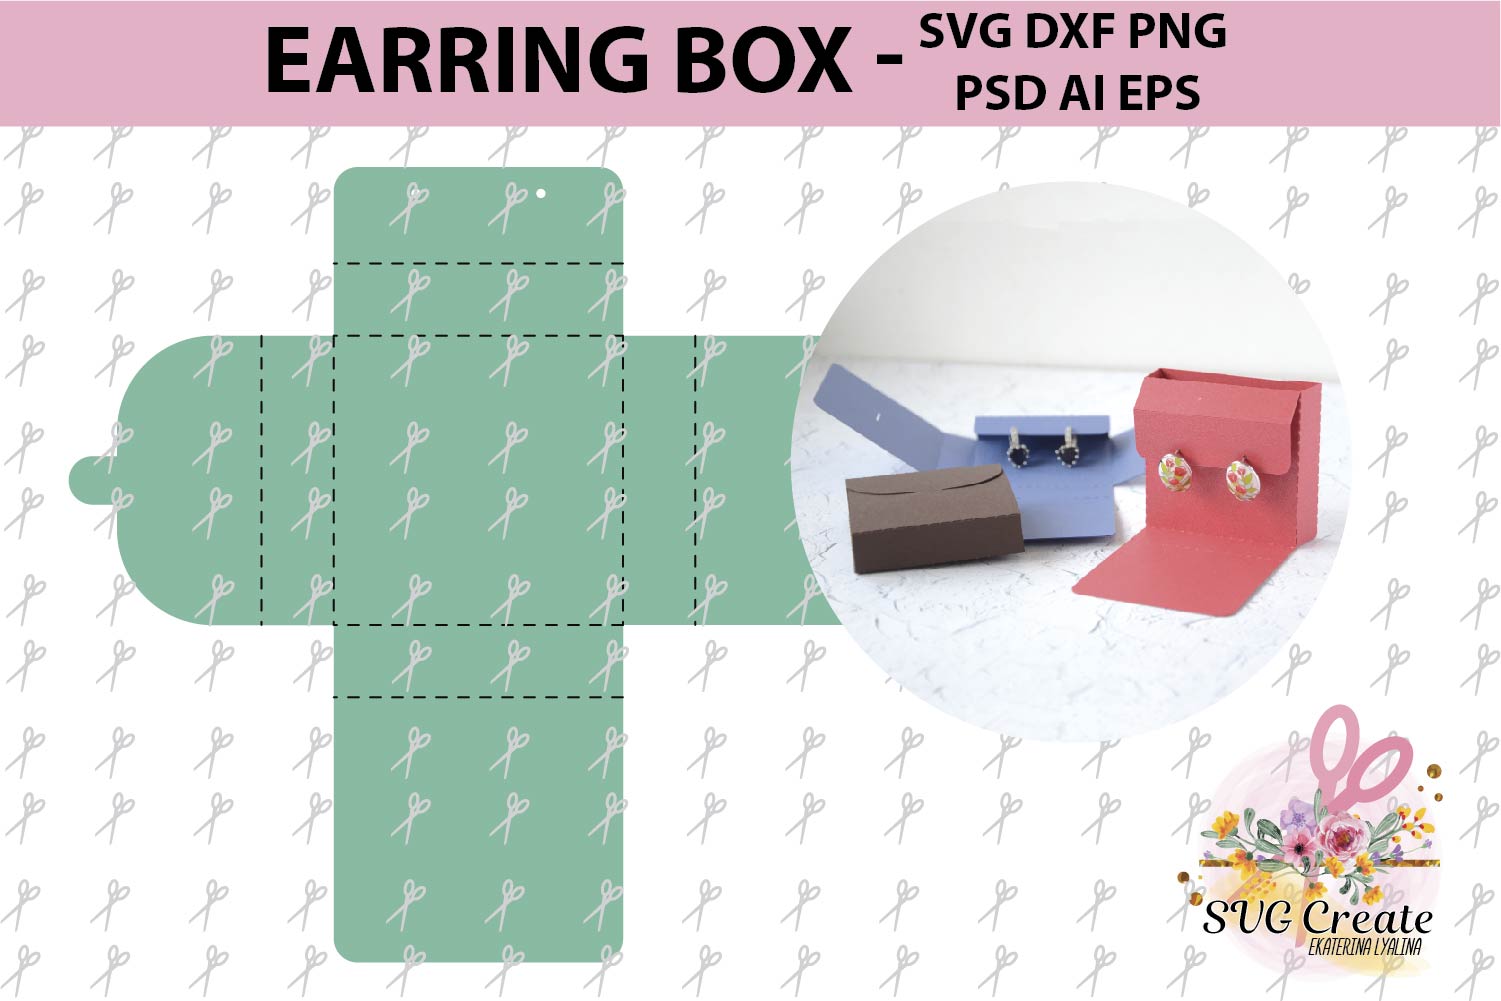 996-earring-card-template-svg-cut-free-svg-cut-files-svgly-for-crafts